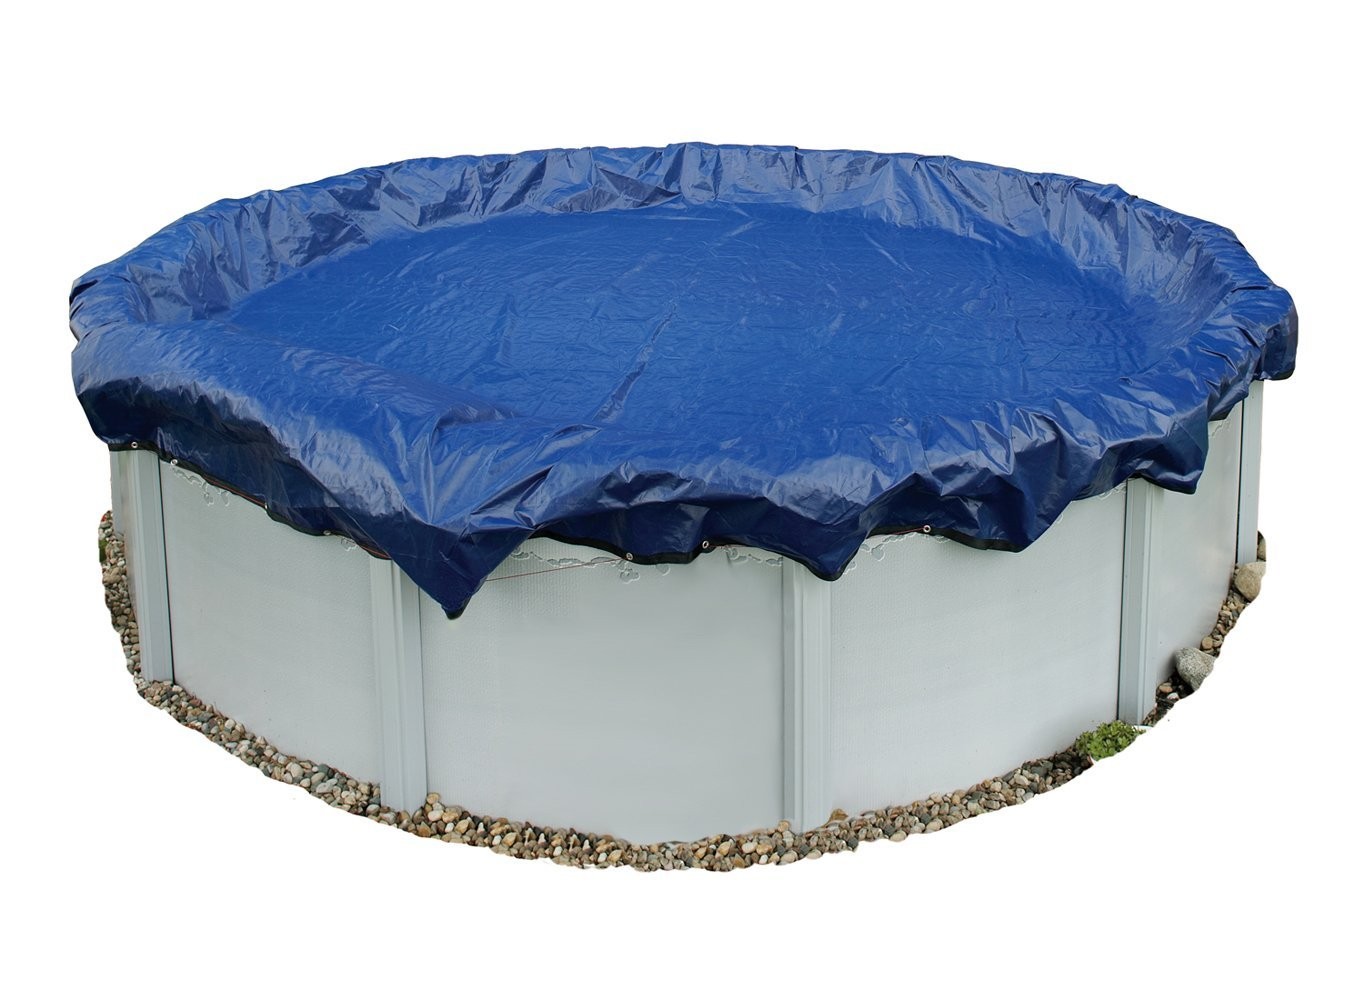 Winter Pool Cover Above Ground 21 Ft Round Arctic Armor 15 Yr Warranty w/ Clips